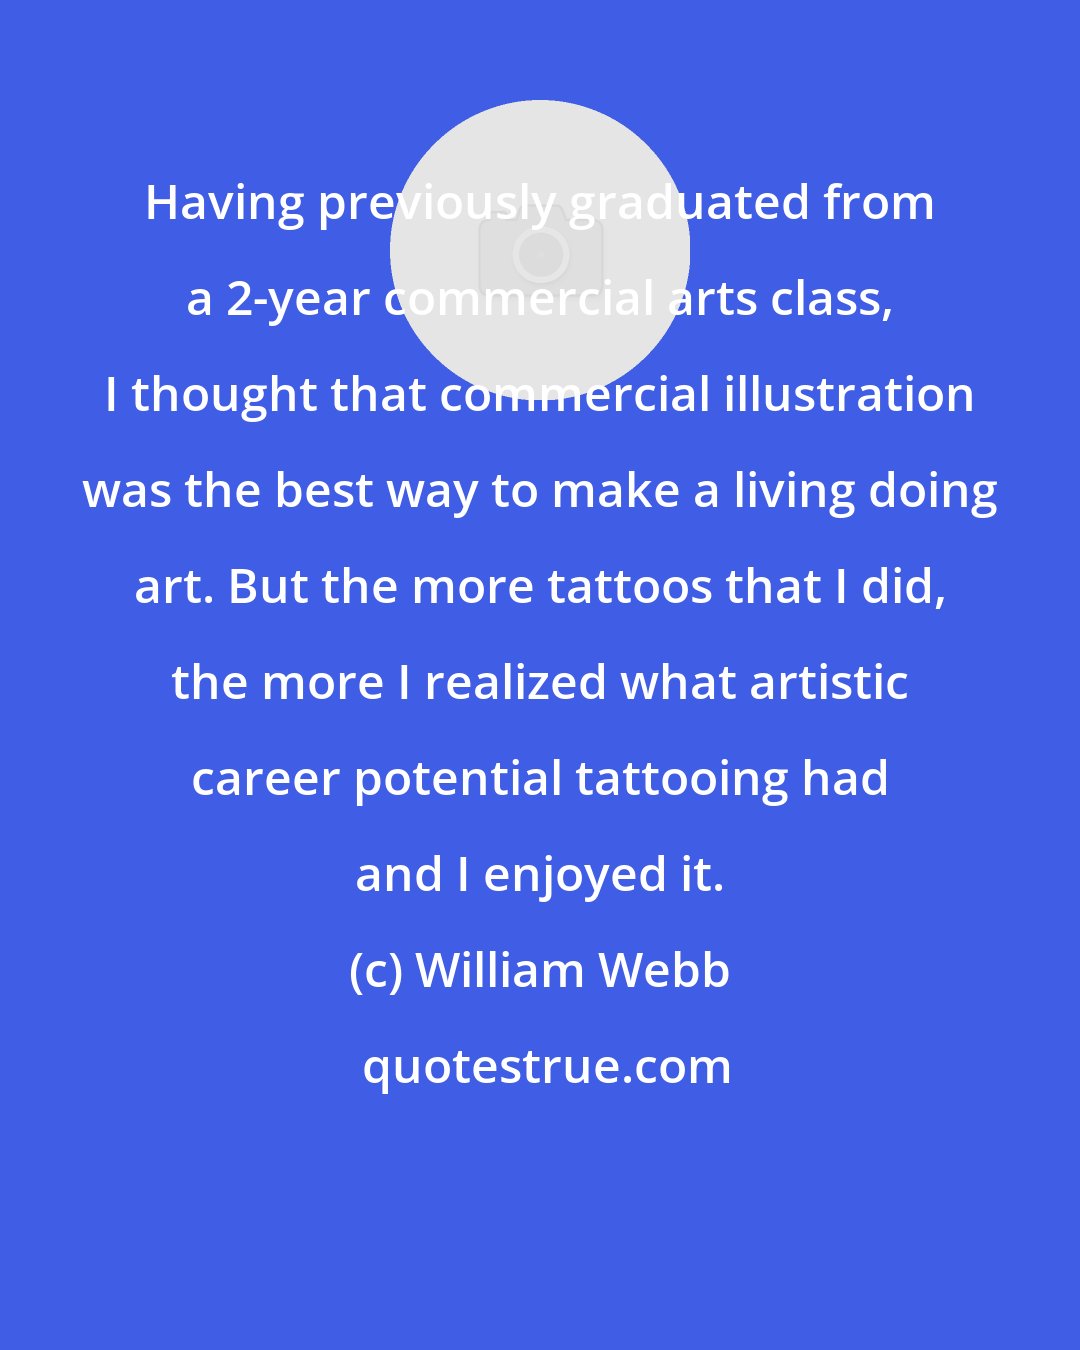 William Webb: Having previously graduated from a 2-year commercial arts class, I thought that commercial illustration was the best way to make a living doing art. But the more tattoos that I did, the more I realized what artistic career potential tattooing had and I enjoyed it.